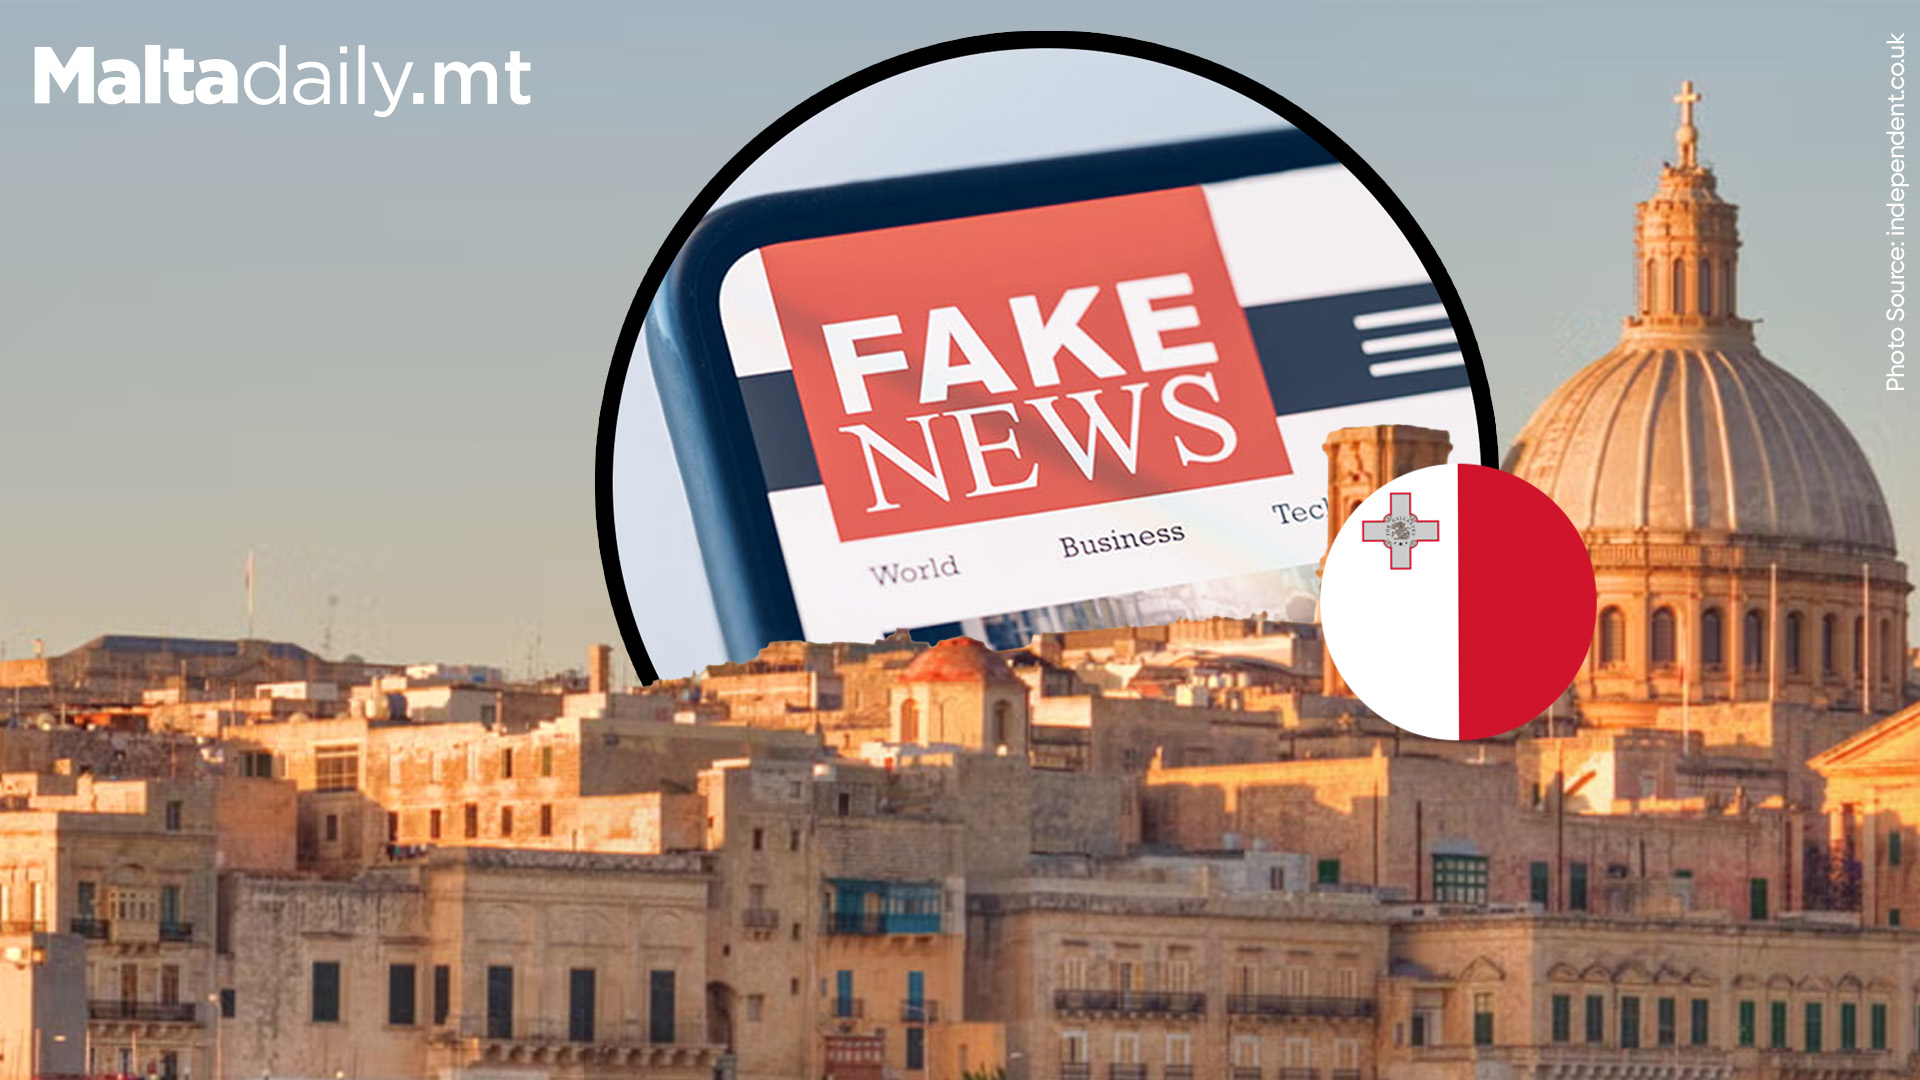 Less than 40% of Young Maltese Make Sure Online Content is True